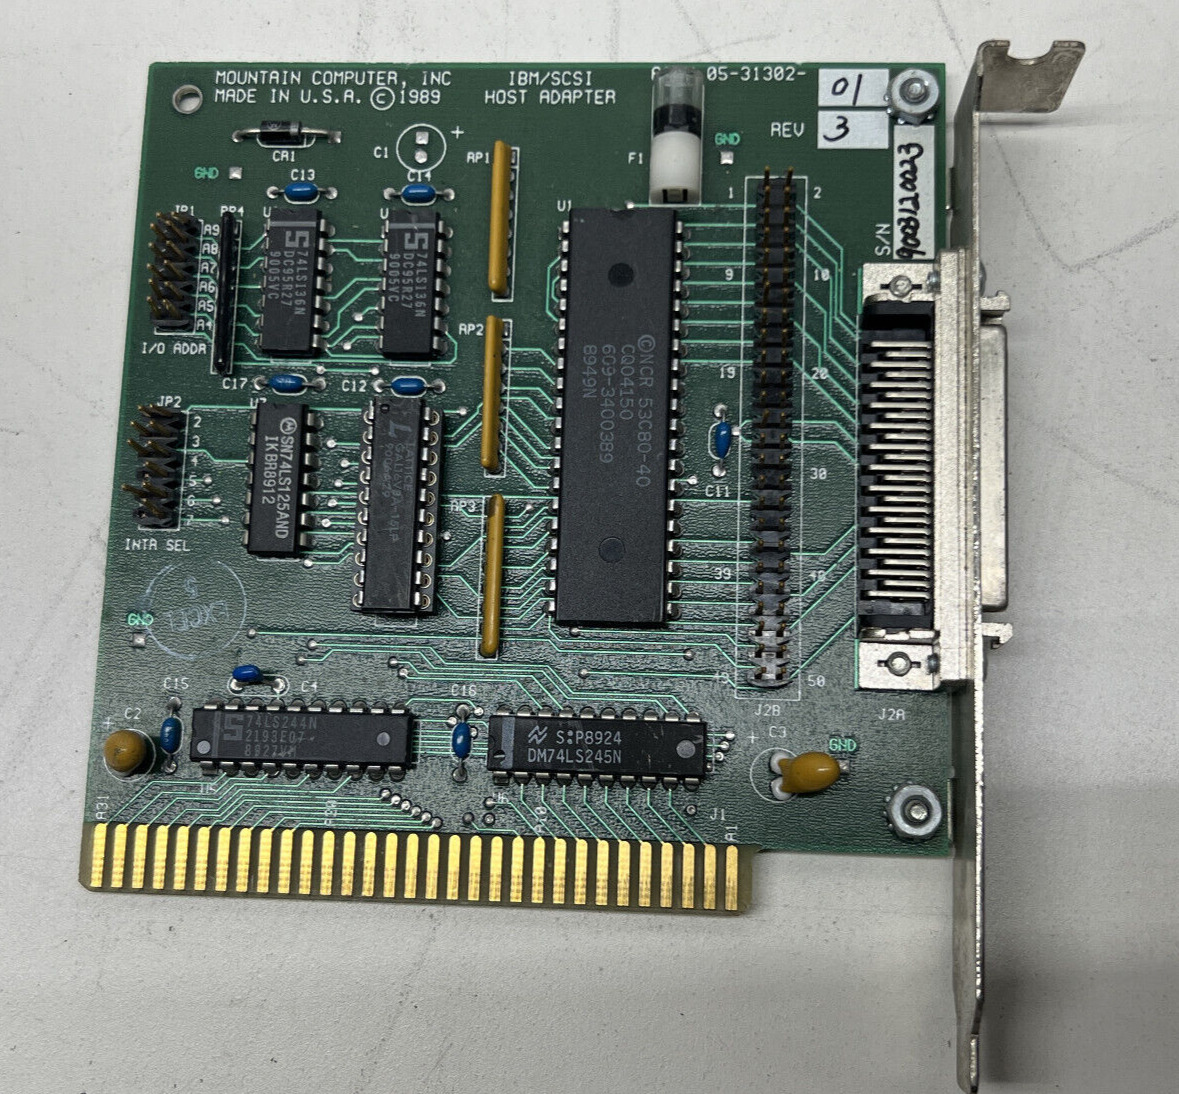 VINTAGE MOUNTAIN COMPUTER 05-31302-01 REV. 3 PC/AT SCSI HOST ADAPTER